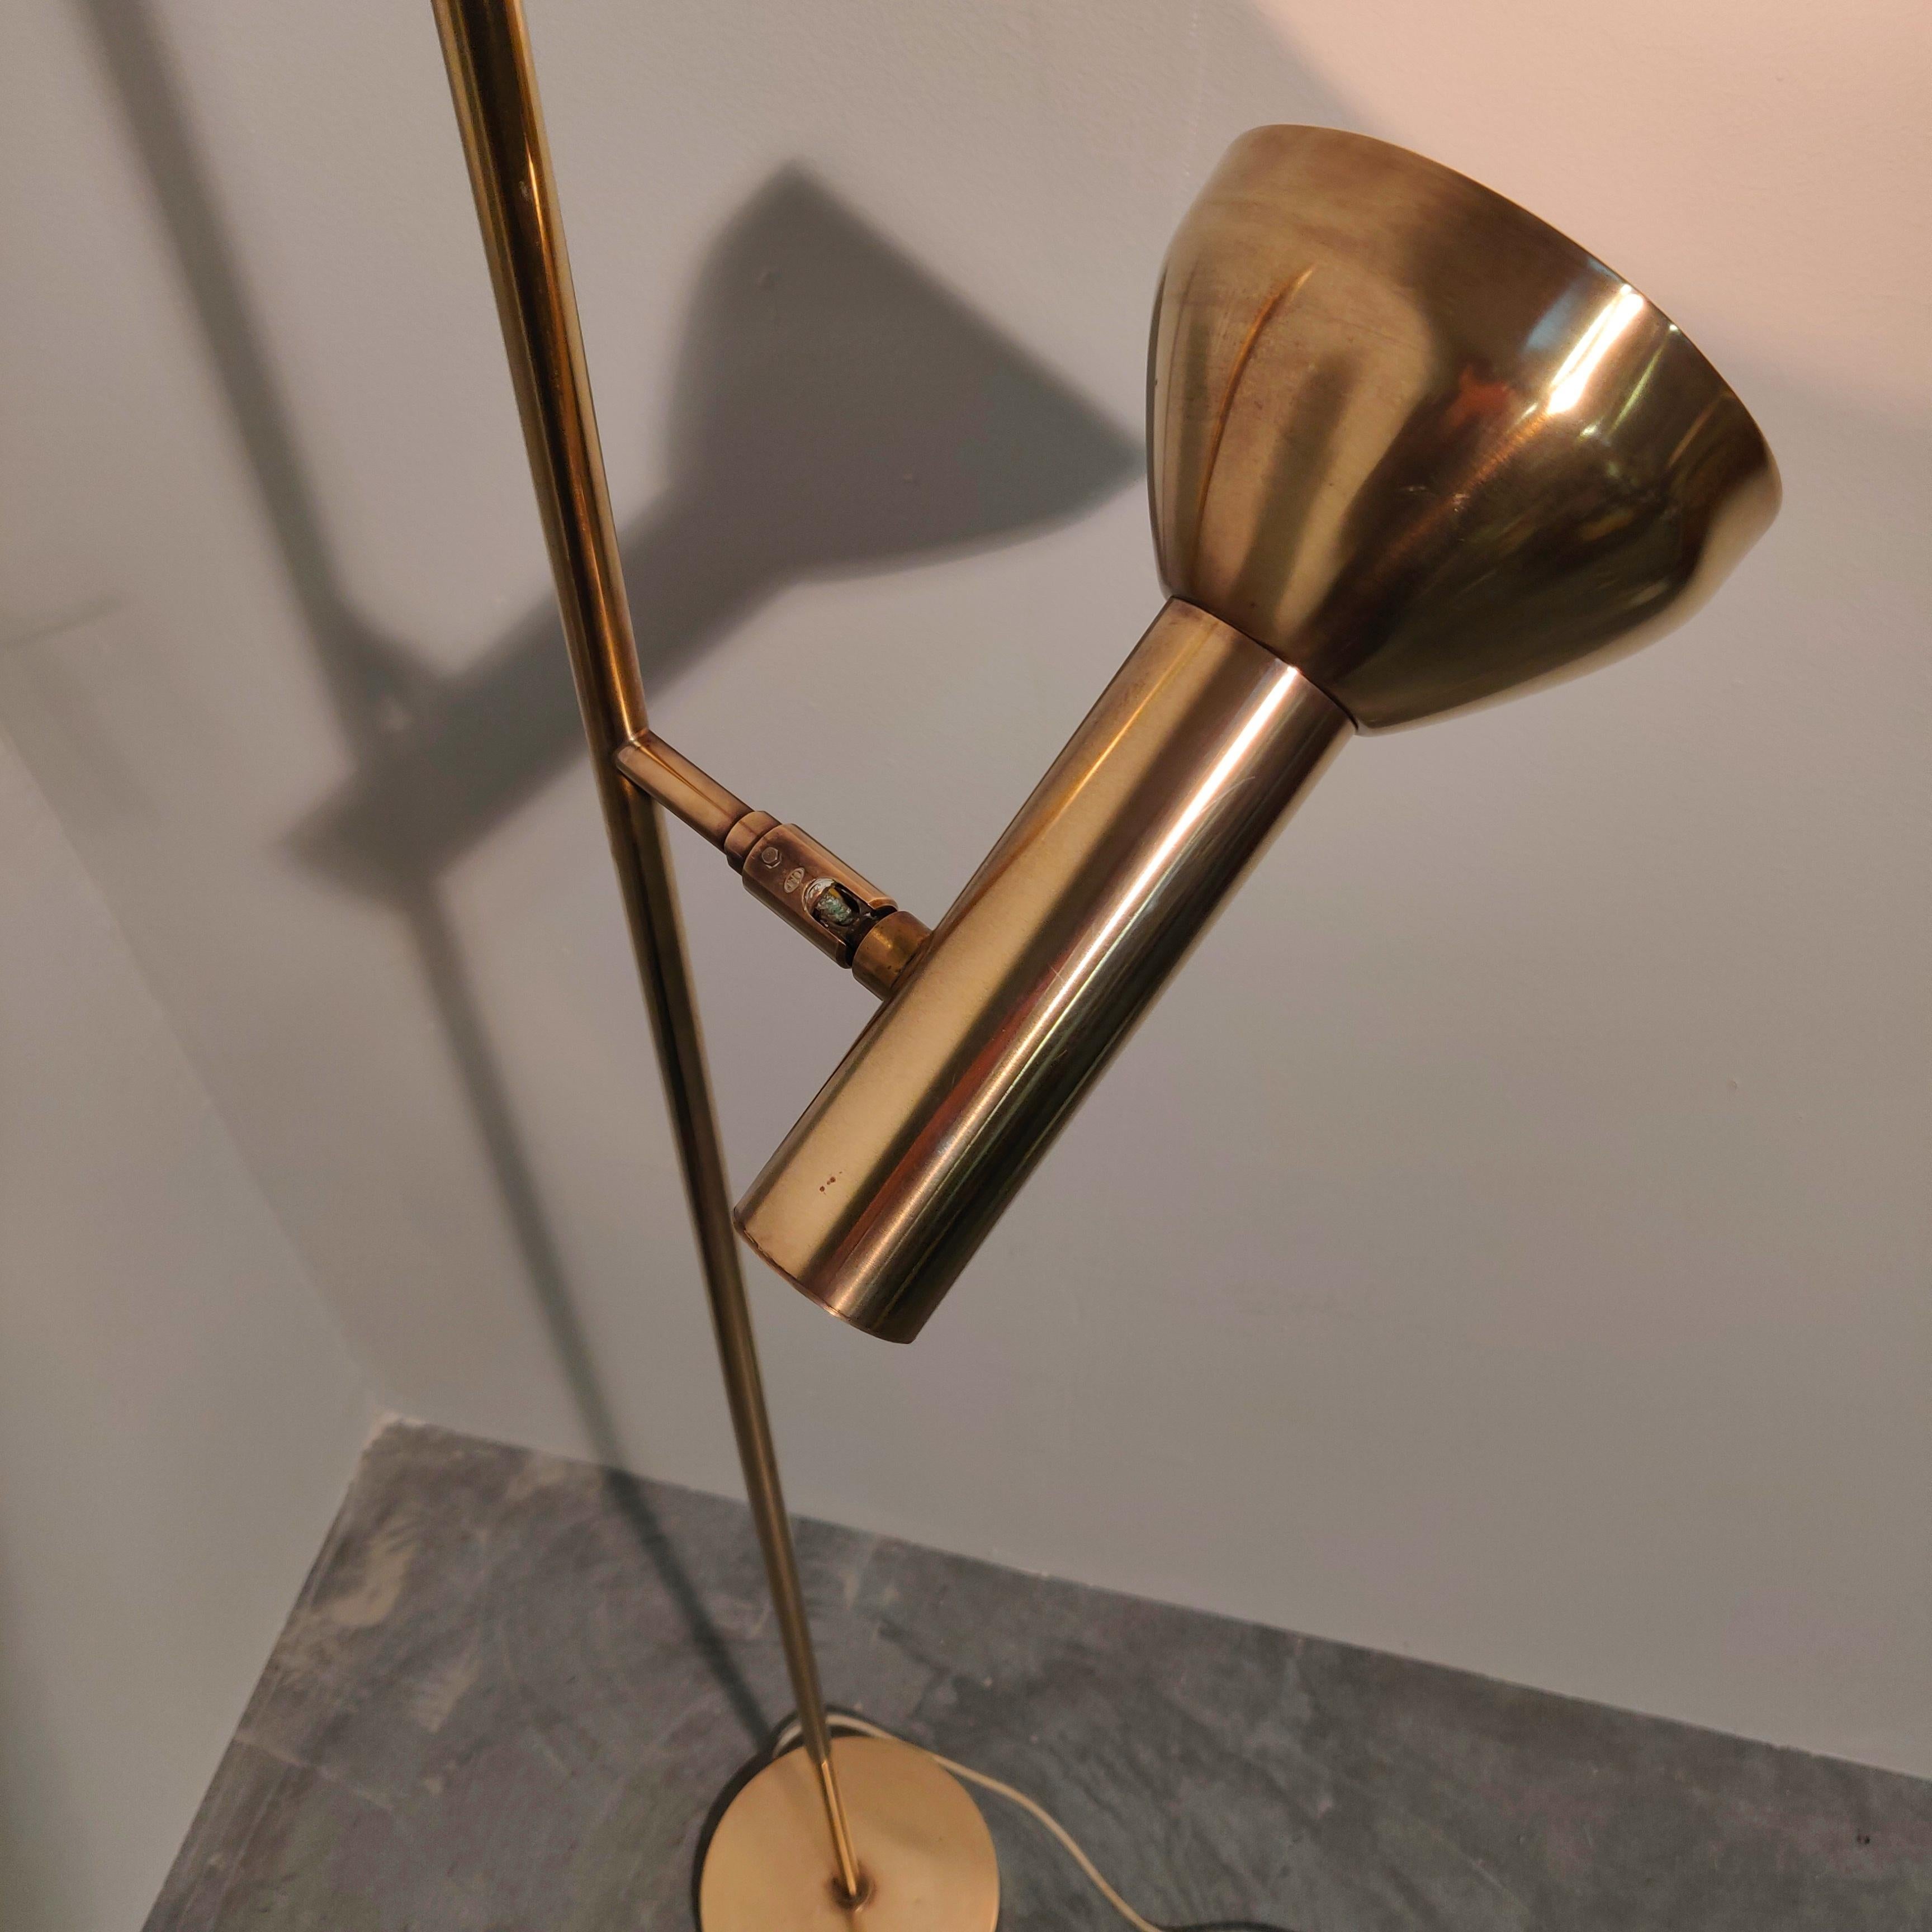 Full brass single shade floor lamp by Cosack Leuchten, 1960s, Germany. 
Heavy brass. Minimal design Very high quality. Fully functional.

This 1960s Brass Cosack floor lamp exists in several versions. Other lampshades were used with the same base